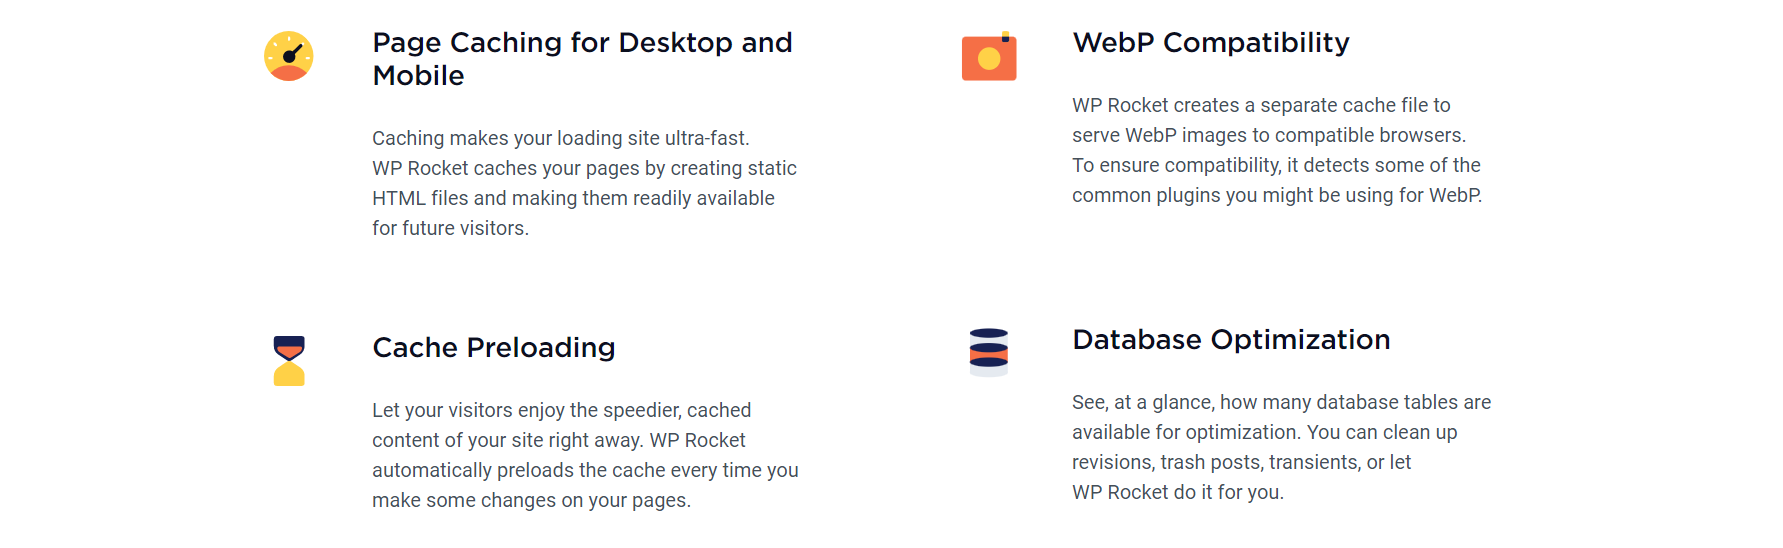 WP Rocket Features